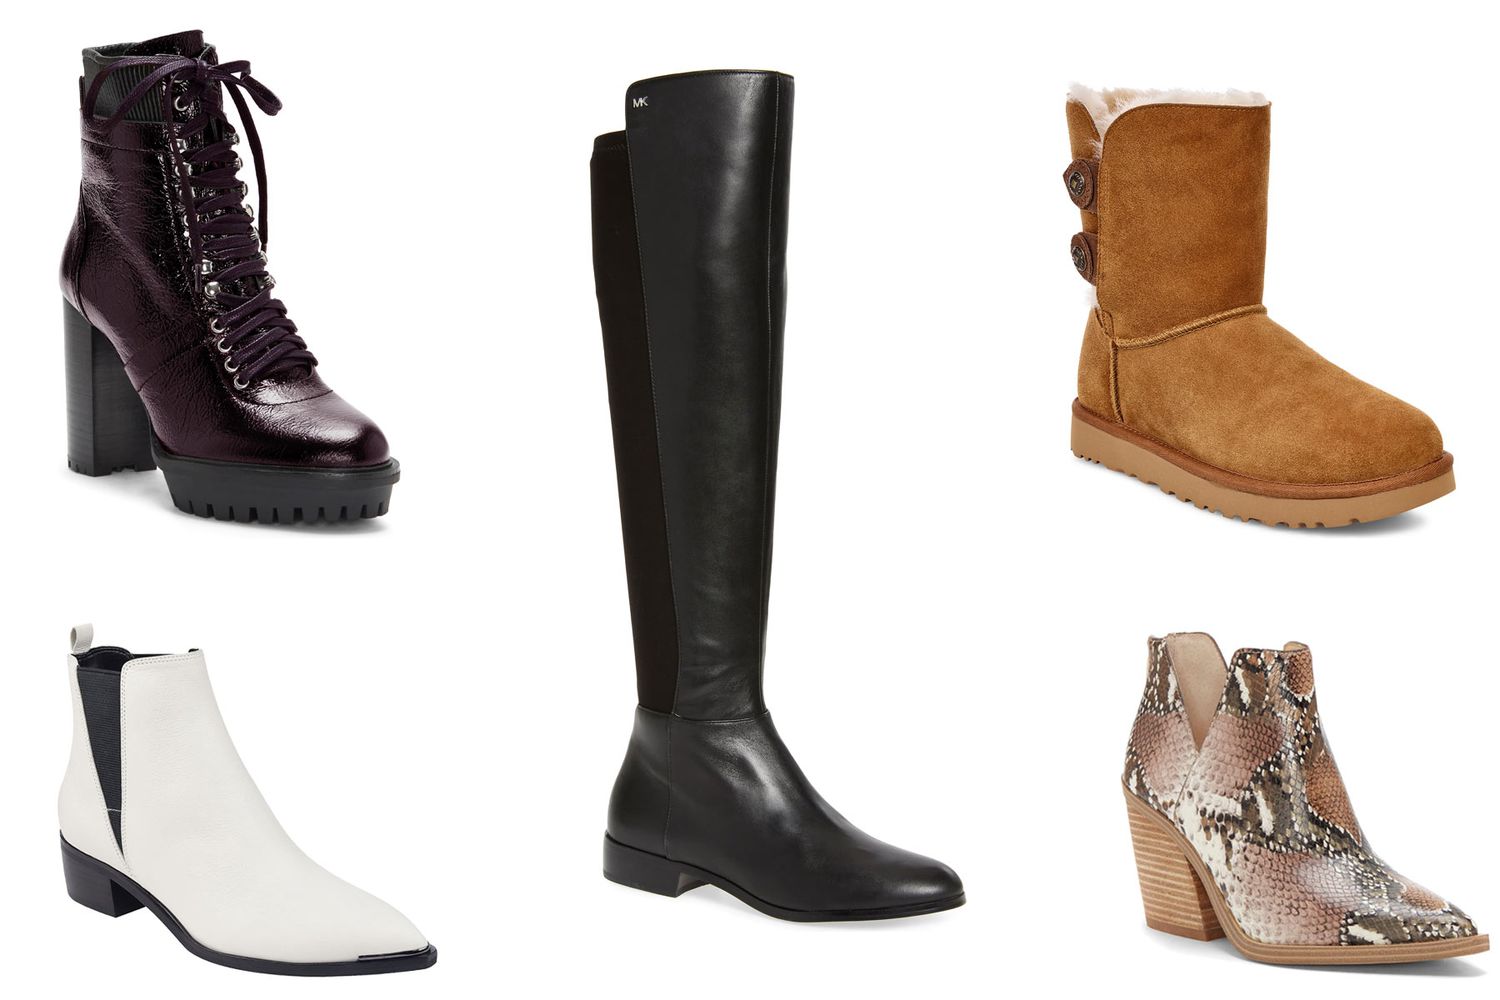 Boots \u0026 Booties On Sale at Nordstrom 